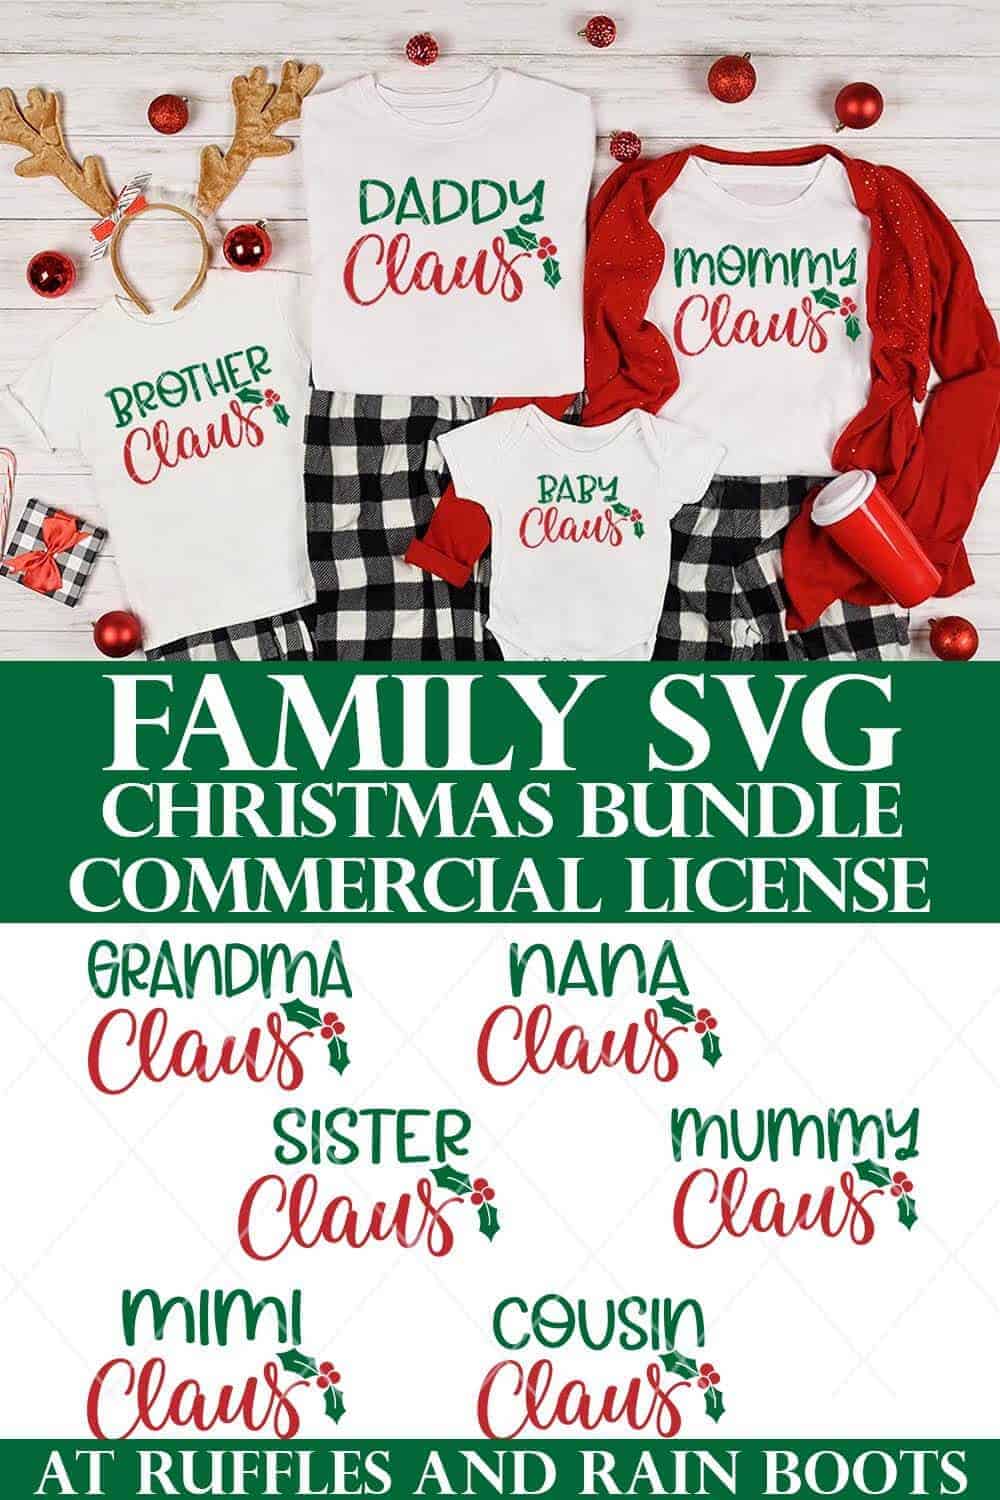 stacked vertical image of family Christmas pajamas on top and designs on bottom with text which reads family SVG Christmas bundle commercial license